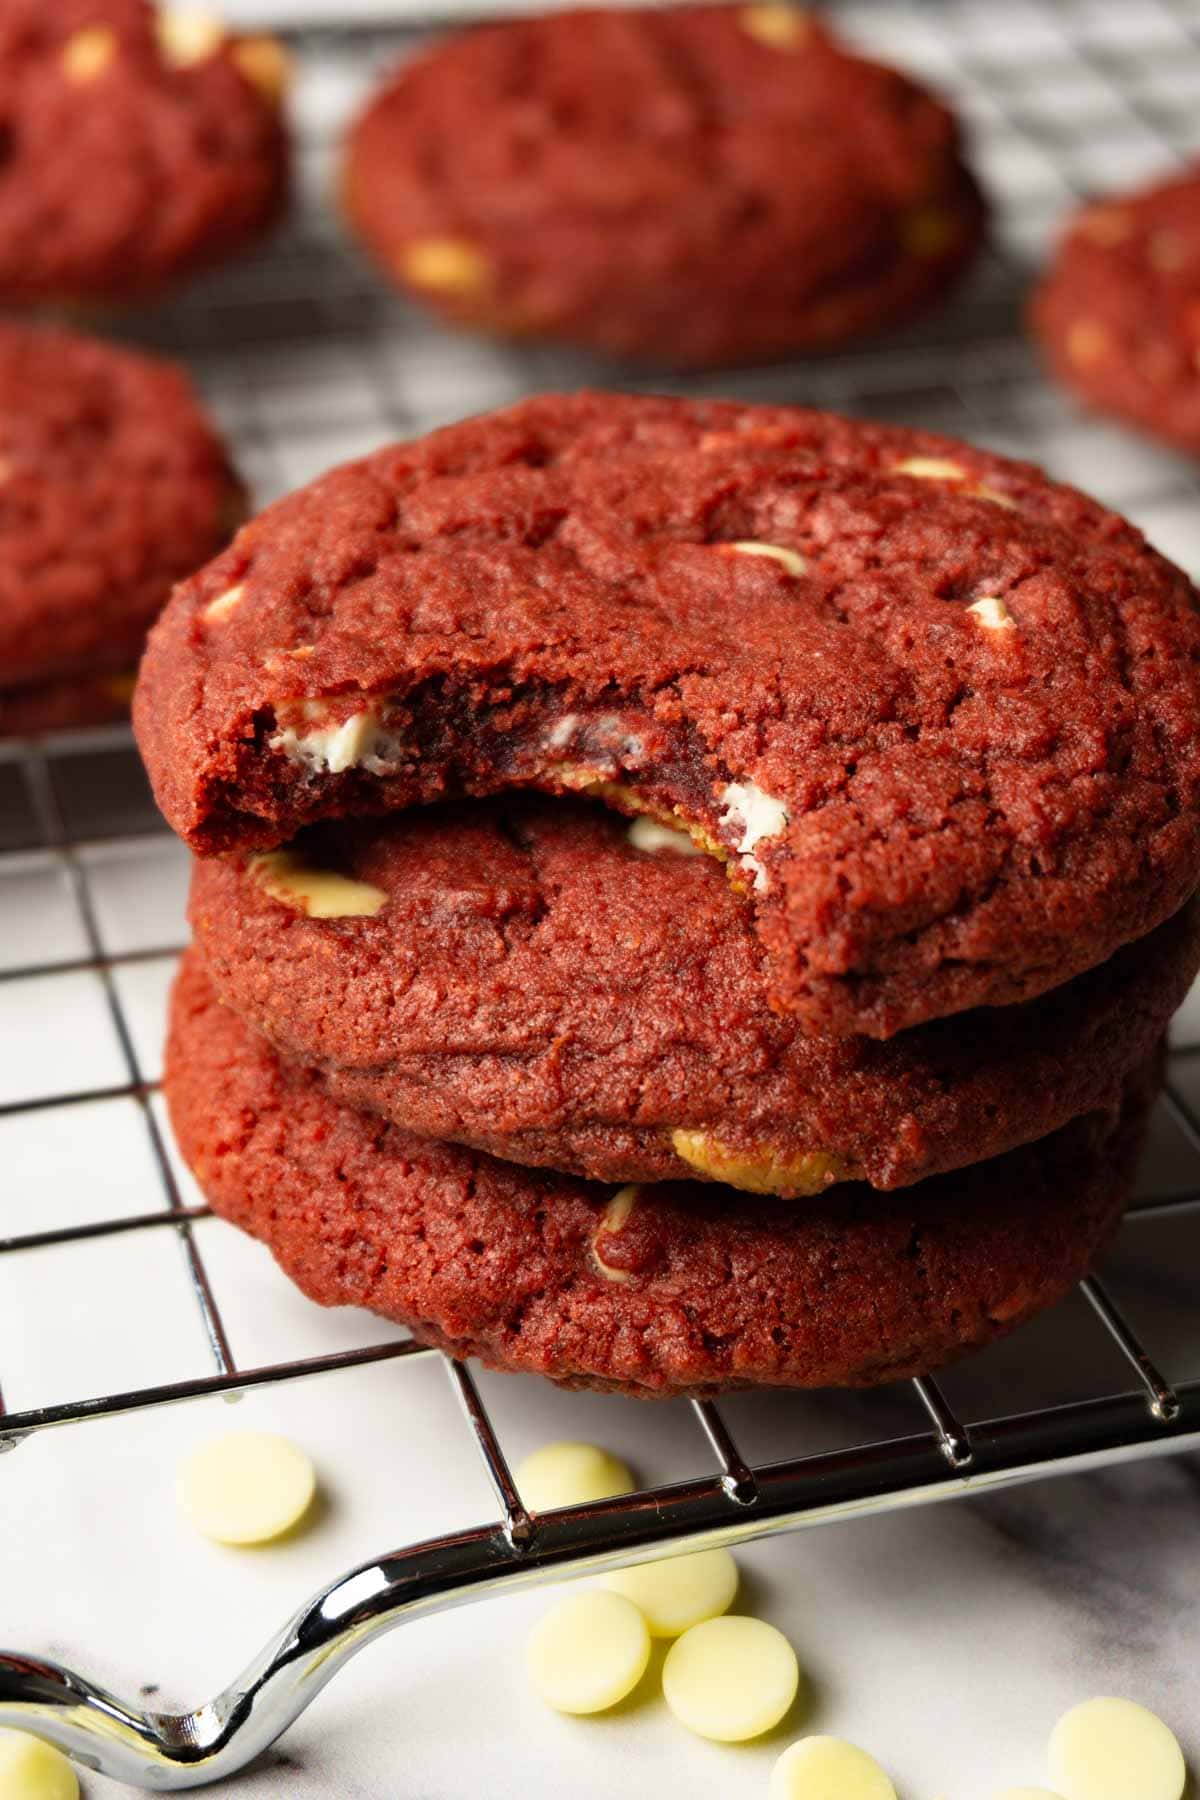 Three red velvet cookies with white chocolate chips stuck on top of each other, one bite taken from the top cookie.